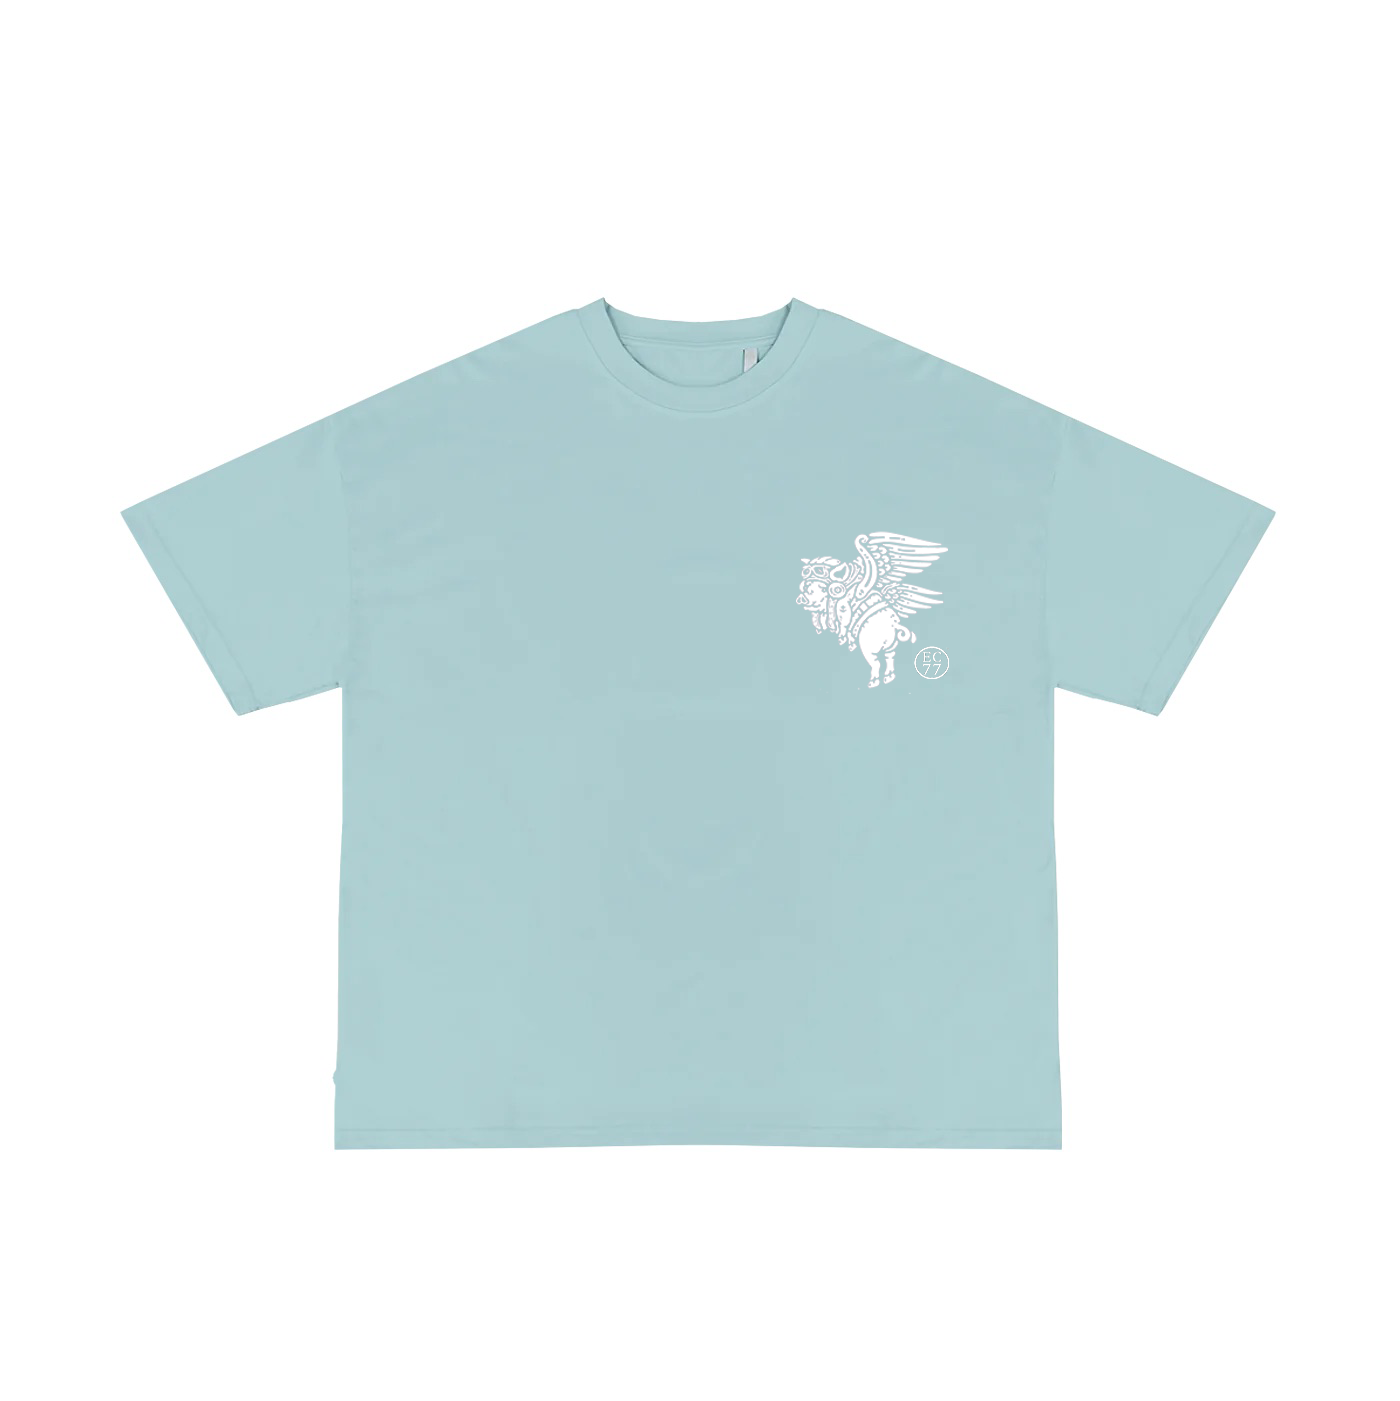 The Flying Pig Tee